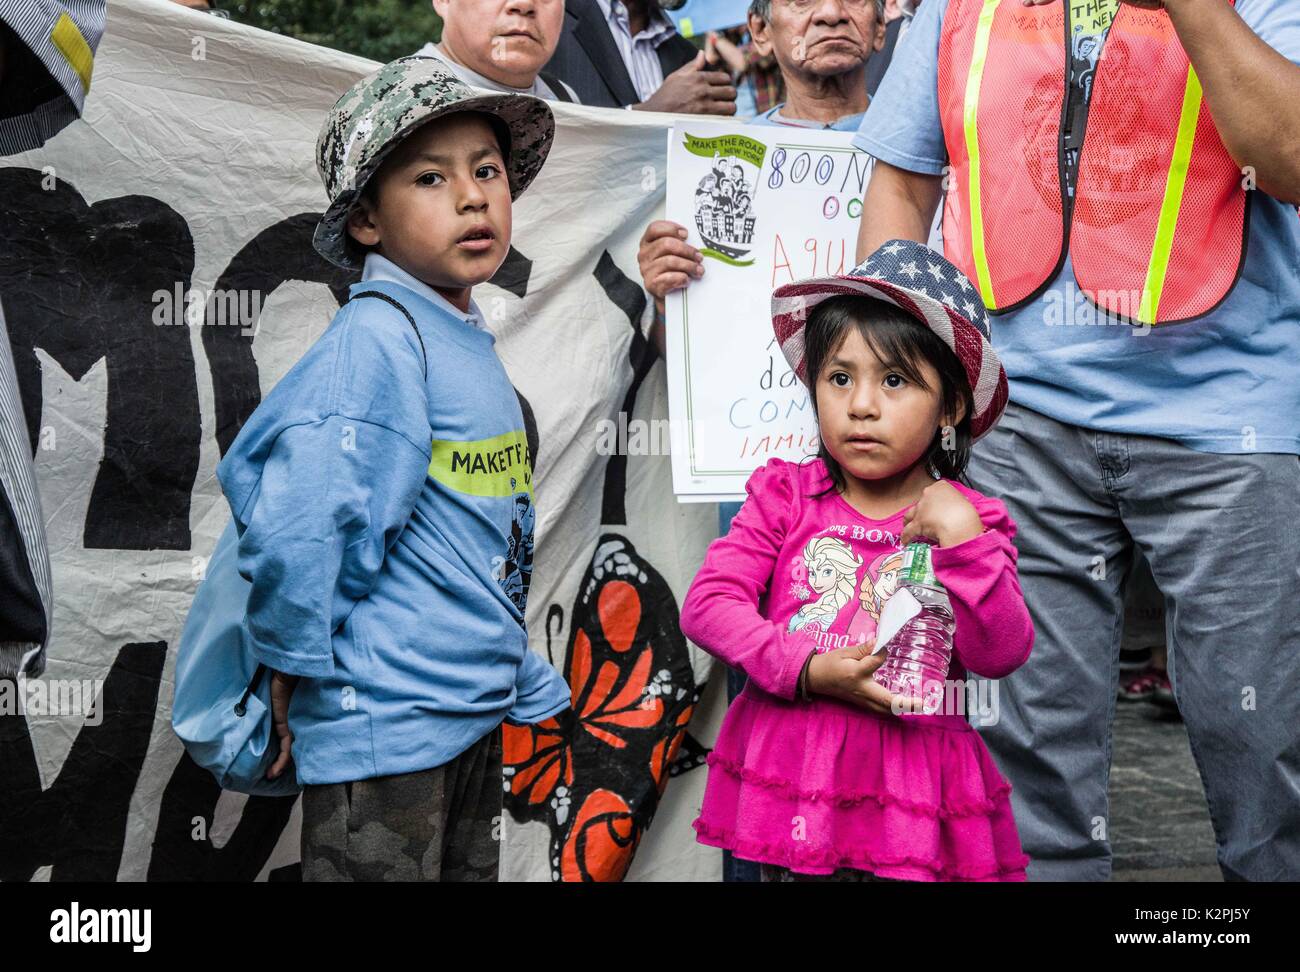 New York City, New York, USA. 30th Aug, 2017. Young dreamers. Due to the review of the DACA Act (DEFERRED ACTION FOR CHILDHOOD ARRIVALS) by the Trump Administration, as well as expectation of the discontinuation of the program, 1,500 New Yorkers gathered at the Trump International Hotel and Tower to demonstrate their support for the act. The DACA Act gives protection against deportation to undocumented young people under 31 years of age, so long as they fulfill certain requirements. Furthermore, the act allows them to attend schools and obtain work permits. The Trump Stock Photo